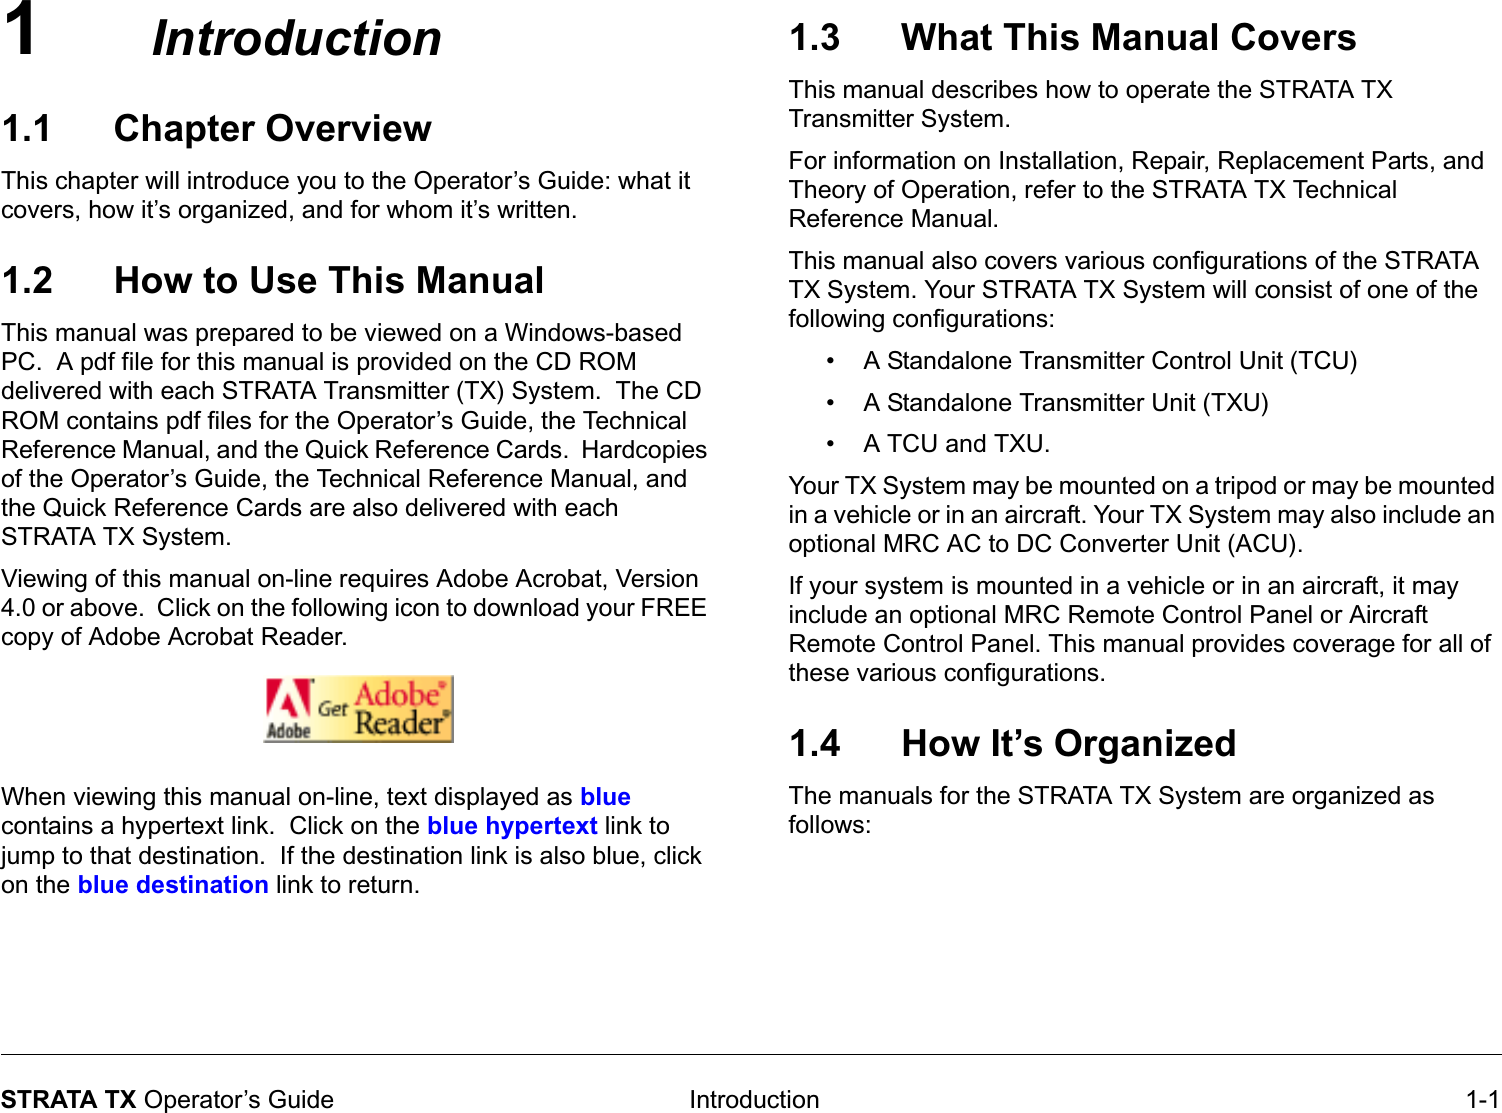 1 Introduction 1-1STRATA TX Operator’s GuideIntroduction1.1 Chapter OverviewThis chapter will introduce you to the Operator’s Guide: what it covers, how it’s organized, and for whom it’s written.1.2 How to Use This ManualThis manual was prepared to be viewed on a Windows-based PC.  A pdf file for this manual is provided on the CD ROM delivered with each STRATA Transmitter (TX) System.  The CD ROM contains pdf files for the Operator’s Guide, the Technical Reference Manual, and the Quick Reference Cards.  Hardcopies of the Operator’s Guide, the Technical Reference Manual, and the Quick Reference Cards are also delivered with each STRATA TX System.Viewing of this manual on-line requires Adobe Acrobat, Version 4.0 or above.  Click on the following icon to download your FREE copy of Adobe Acrobat Reader.When viewing this manual on-line, text displayed as blue contains a hypertext link.  Click on the blue hypertext link to jump to that destination.  If the destination link is also blue, click on the blue destination link to return.1.3 What This Manual CoversThis manual describes how to operate the STRATA TX Transmitter System.For information on Installation, Repair, Replacement Parts, and Theory of Operation, refer to the STRATA TX Technical Reference Manual. This manual also covers various configurations of the STRATA TX System. Your STRATA TX System will consist of one of the following configurations:• A Standalone Transmitter Control Unit (TCU)• A Standalone Transmitter Unit (TXU)• A TCU and TXU.Your TX System may be mounted on a tripod or may be mounted in a vehicle or in an aircraft. Your TX System may also include an optional MRC AC to DC Converter Unit (ACU). If your system is mounted in a vehicle or in an aircraft, it may  include an optional MRC Remote Control Panel or Aircraft Remote Control Panel. This manual provides coverage for all of these various configurations.1.4 How It’s OrganizedThe manuals for the STRATA TX System are organized as follows: